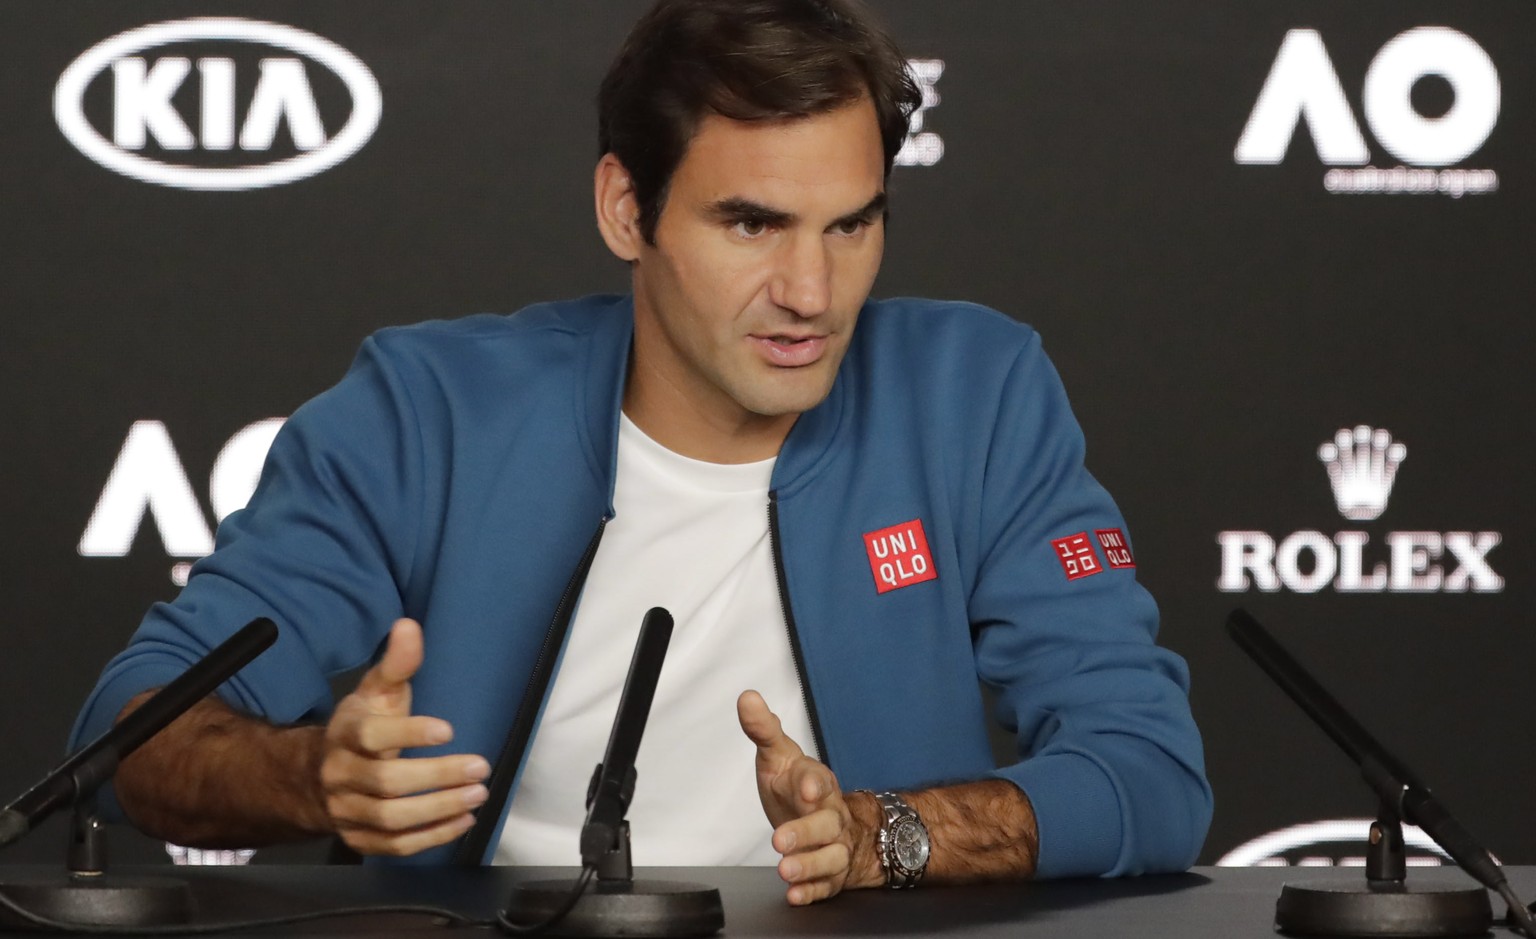 epa07279085 Roger Federer of Switzerland gestures during a press conference prior to the Australian Open Grand Slam tennis tournament in Melbourne, Australia, 13 January 2019. EPA/MAST IRHAM